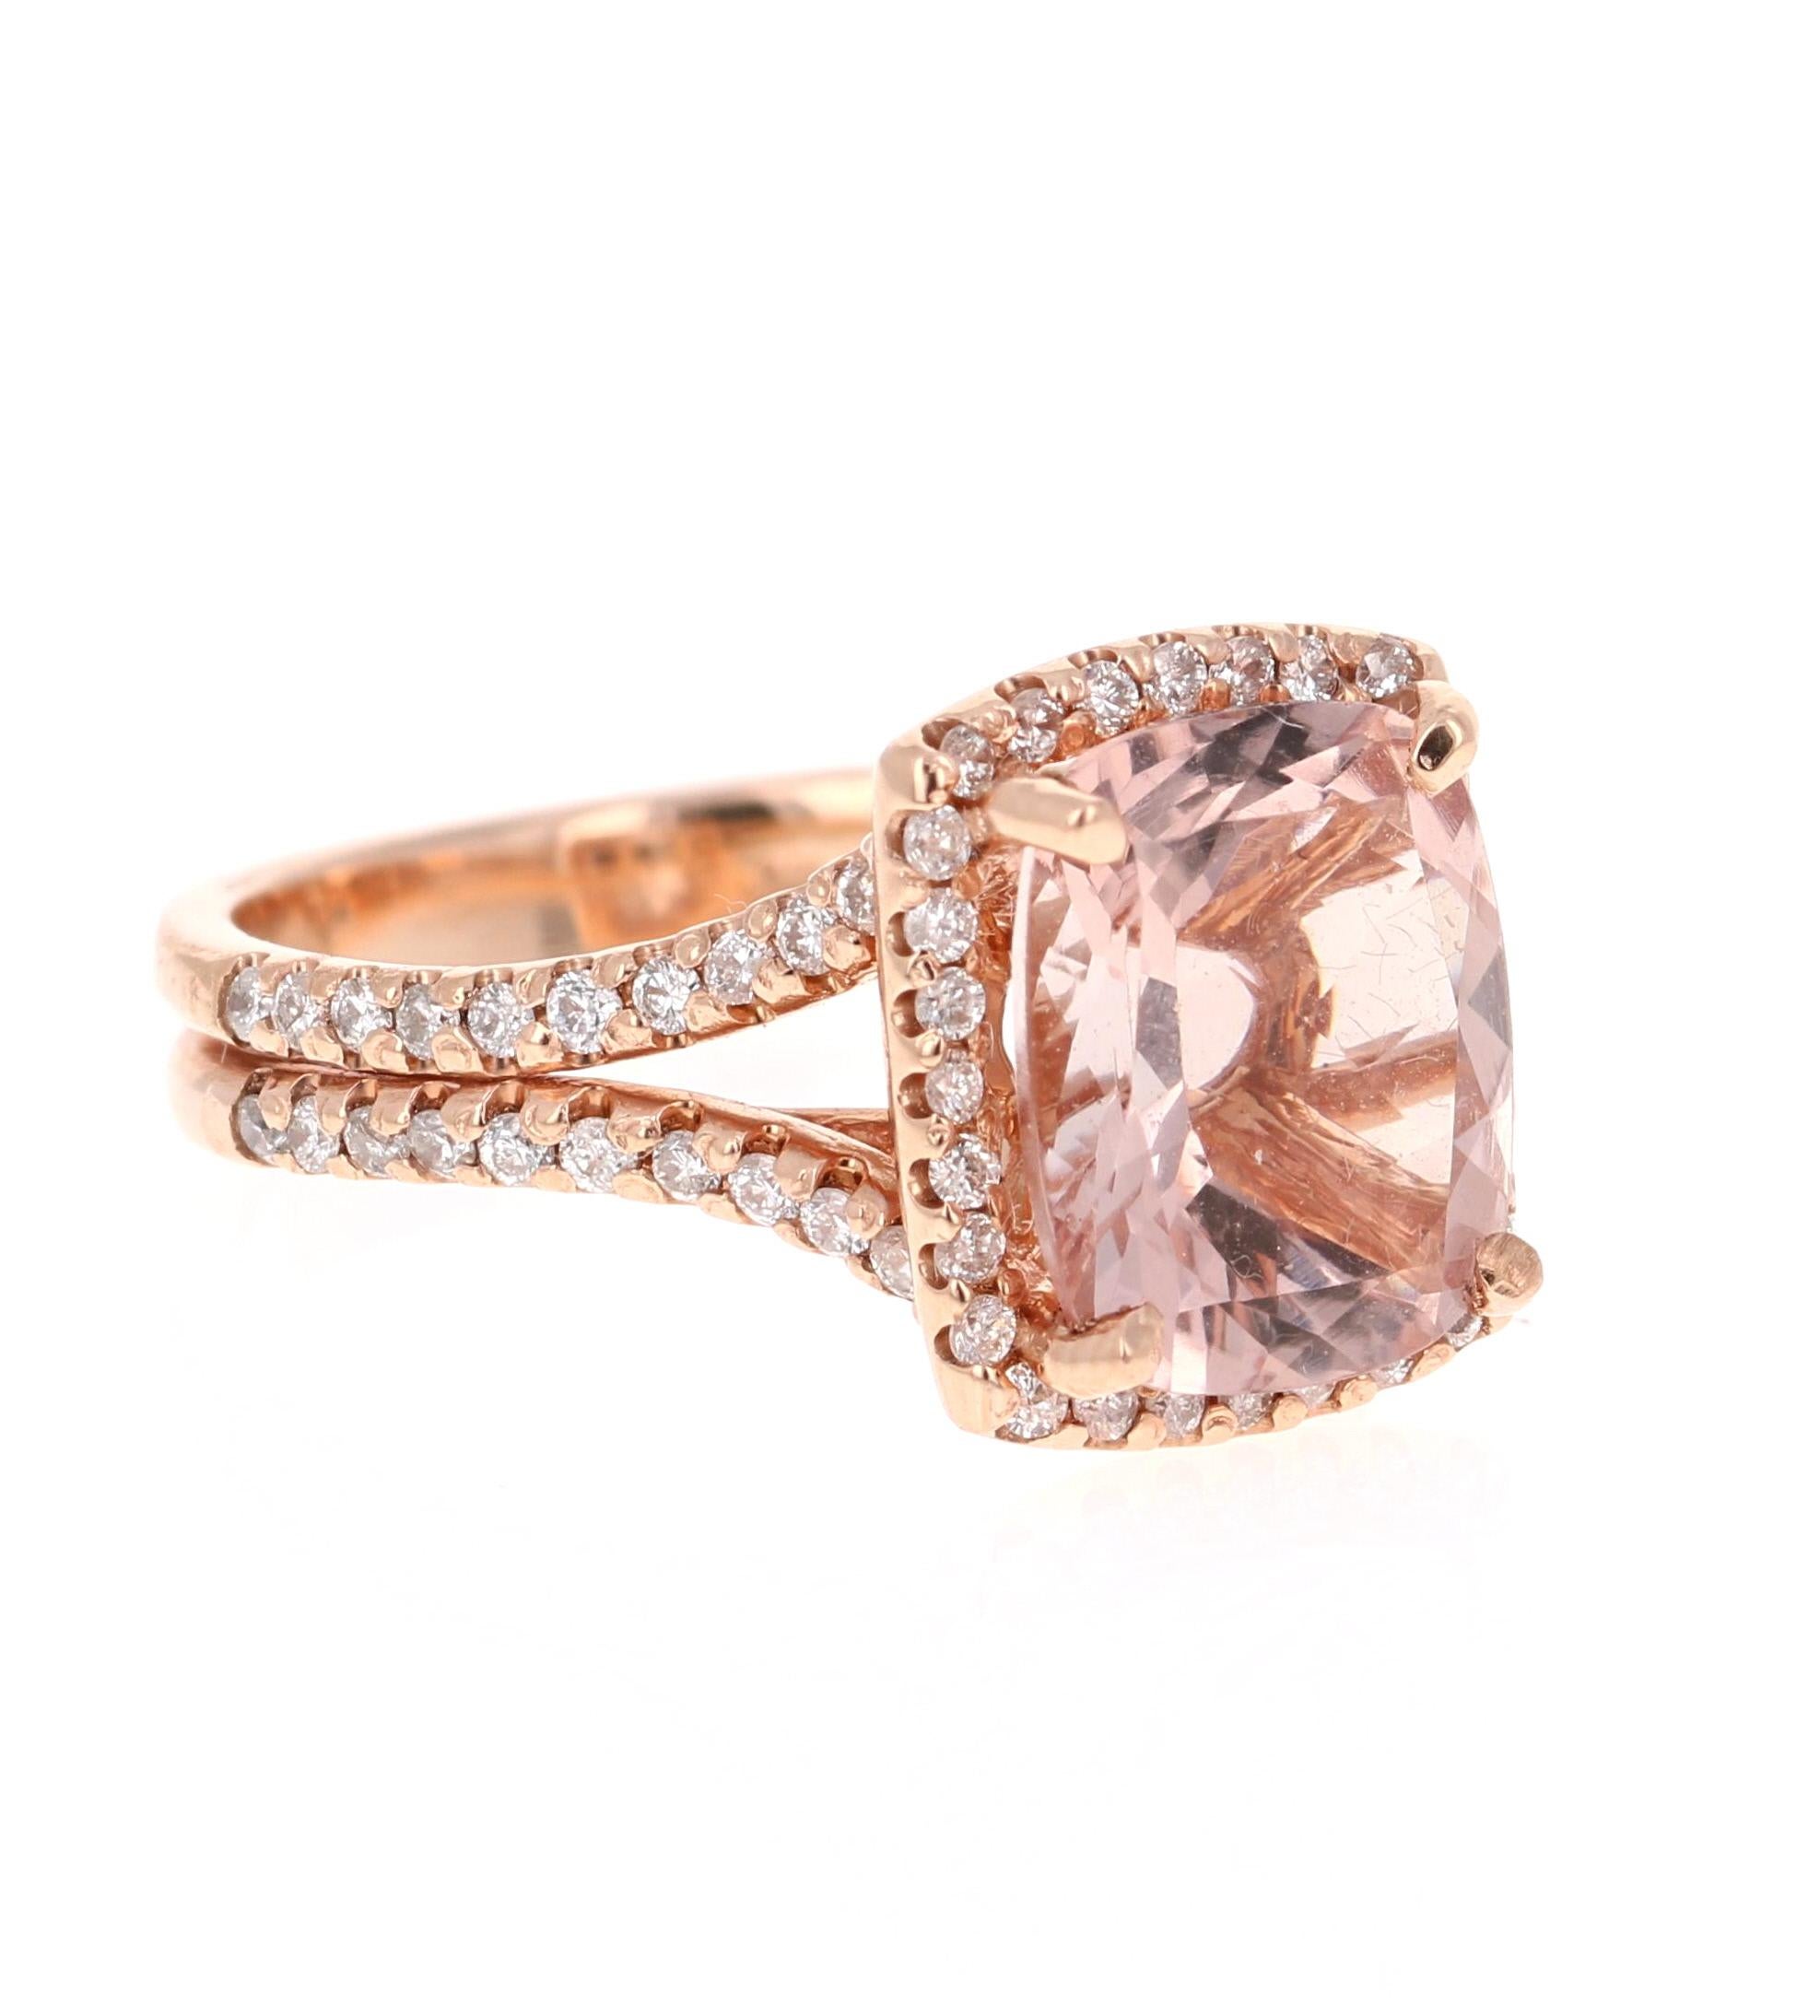 One of a Kind Engagement Ring or Cocktail Ring!

This Morganite ring has a 3.63 Carat Cushion Cut Morganite and is surrounded by 80 Round Cut Diamonds that weigh 0.67 Carats. The total carat weight of the ring is 4.30 Carats. 

It is crafted and set